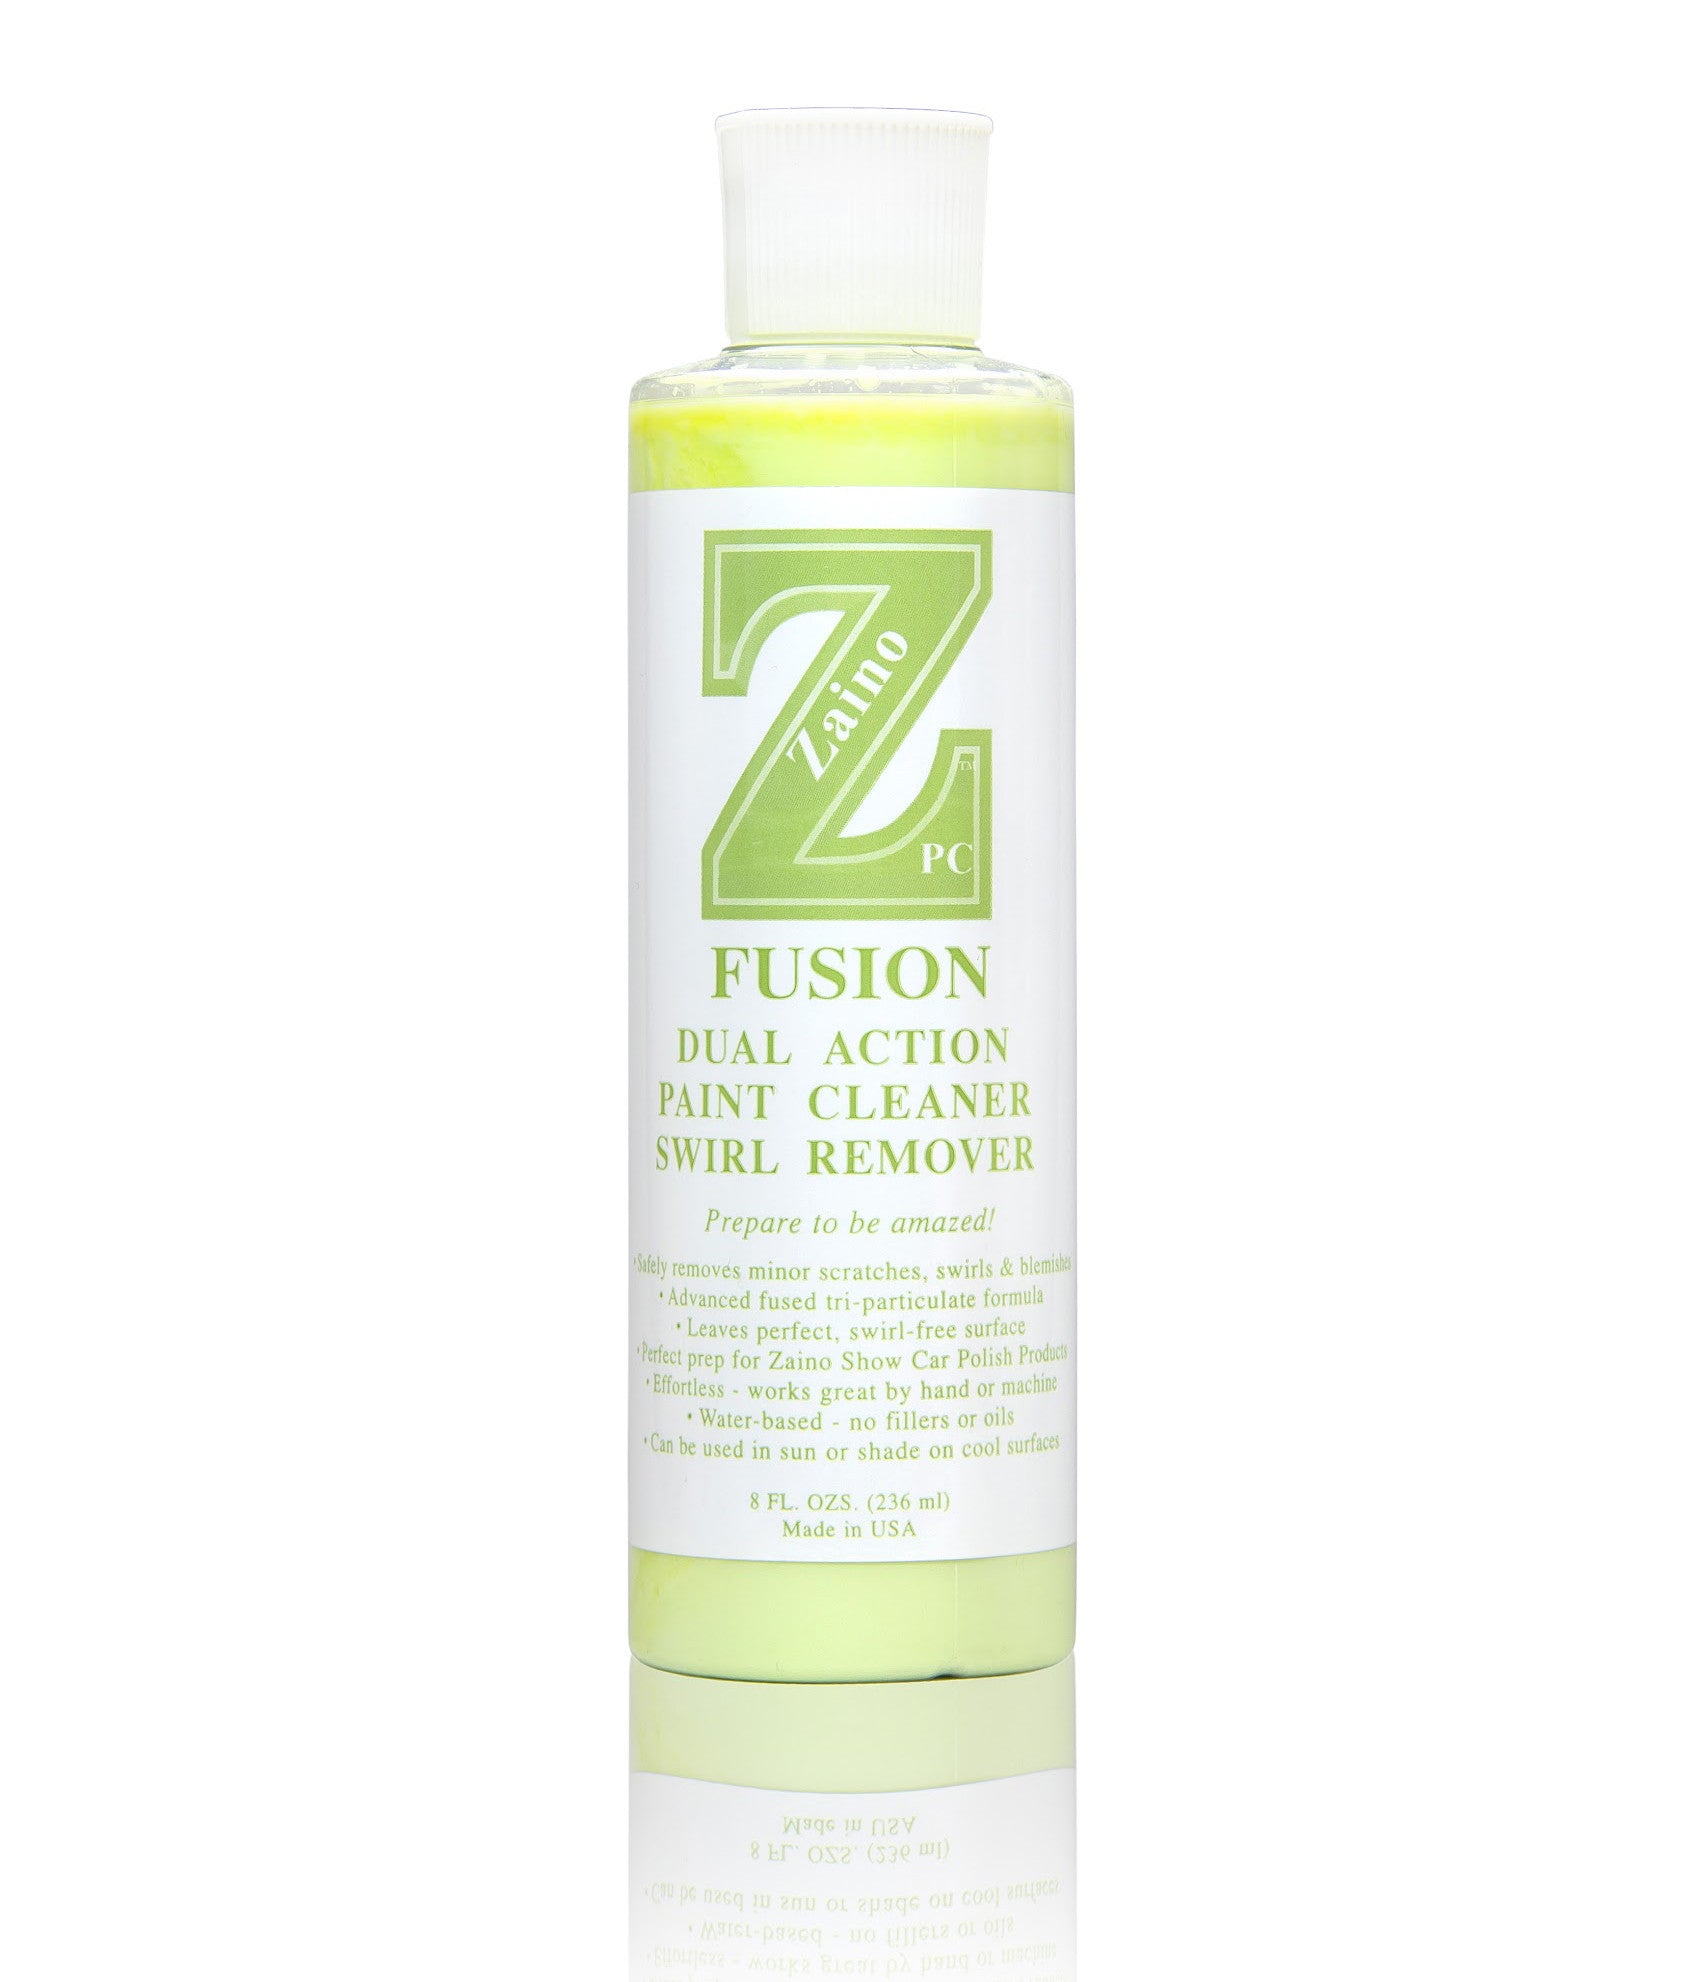 Zaino Z-PC Fusion Dual Action Paint Cleaner Swirl Remover